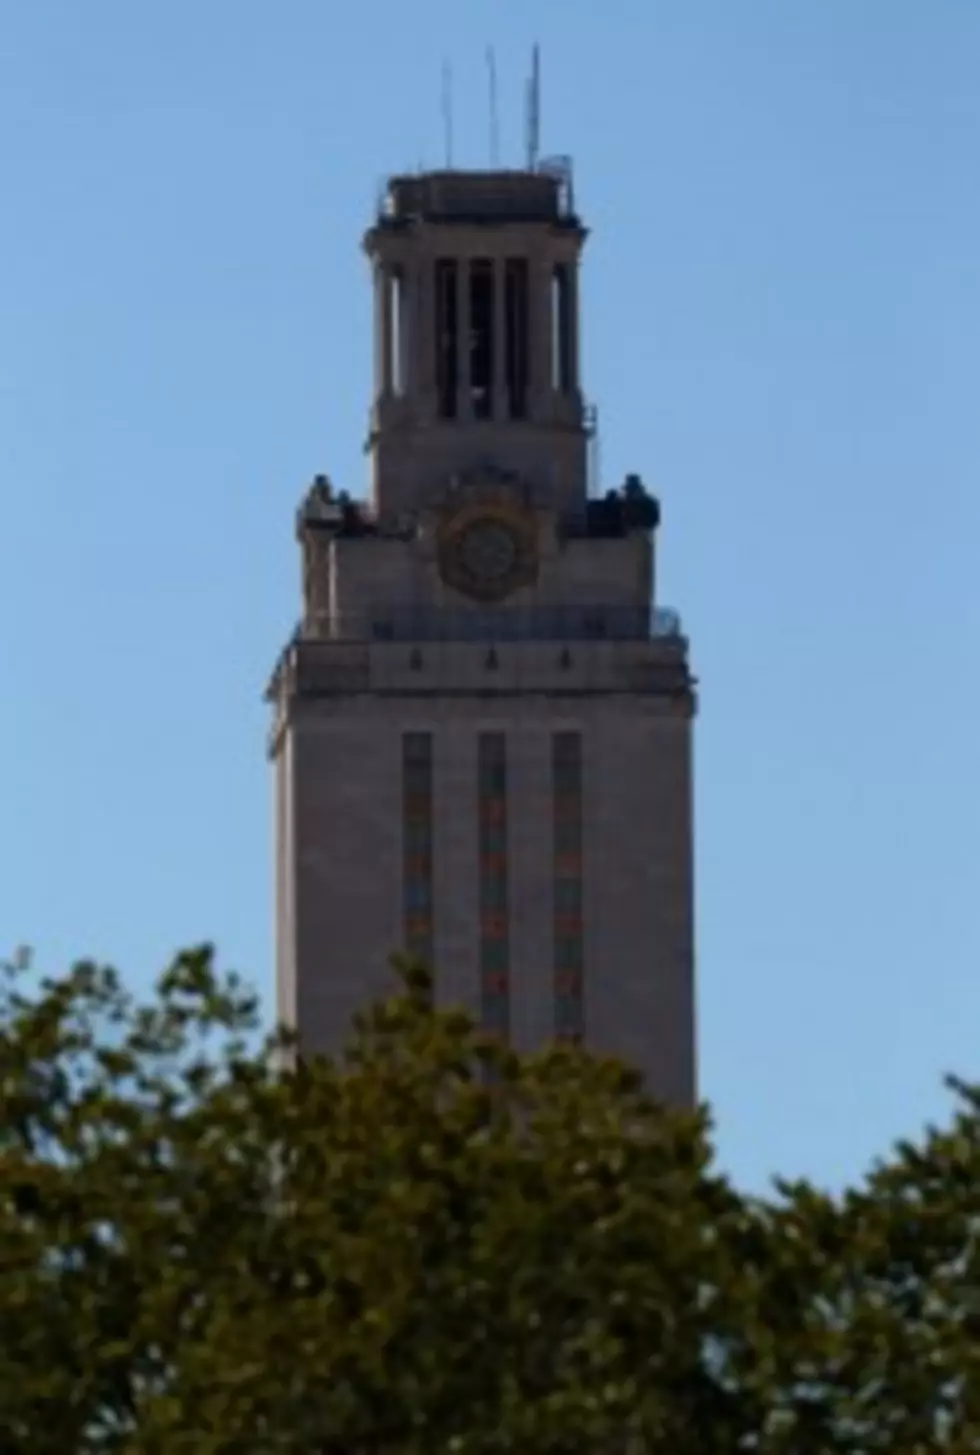 UT Campus Without Power